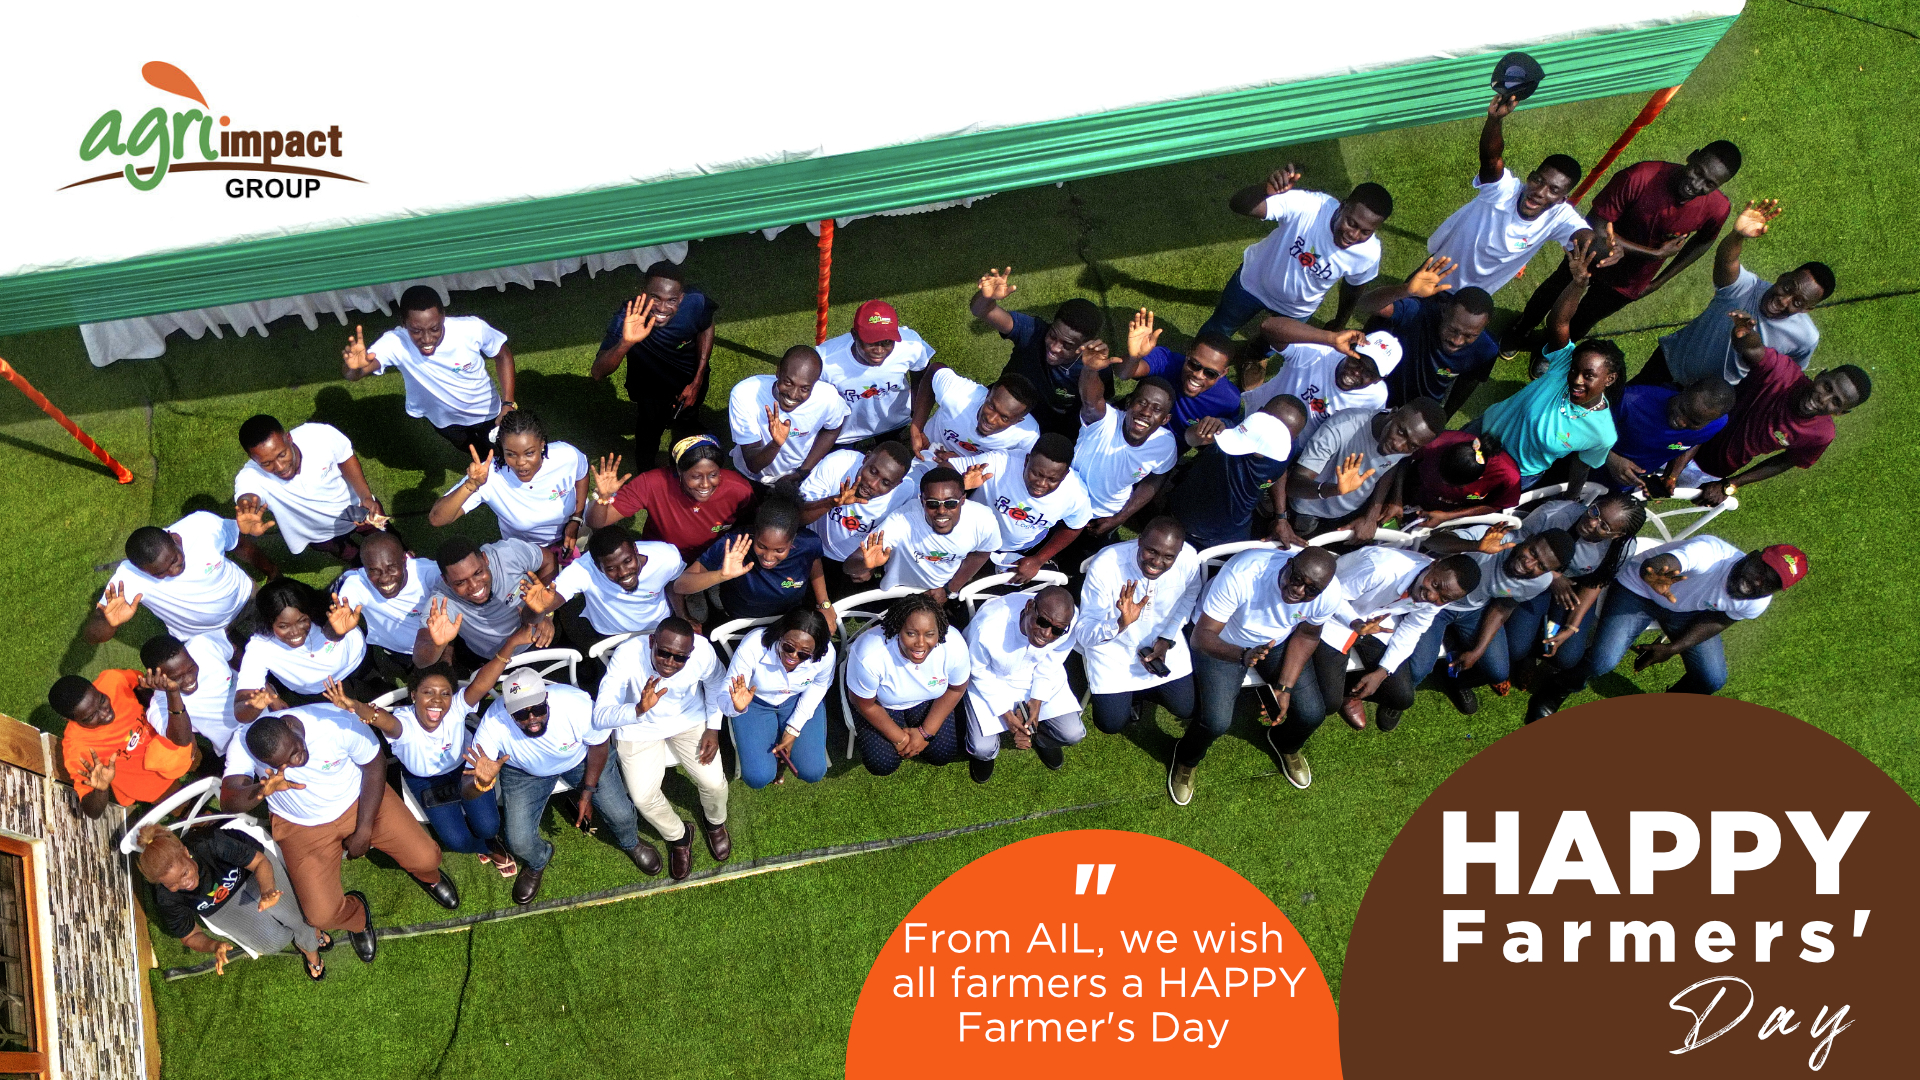 Farmers' Day good will message from AIG